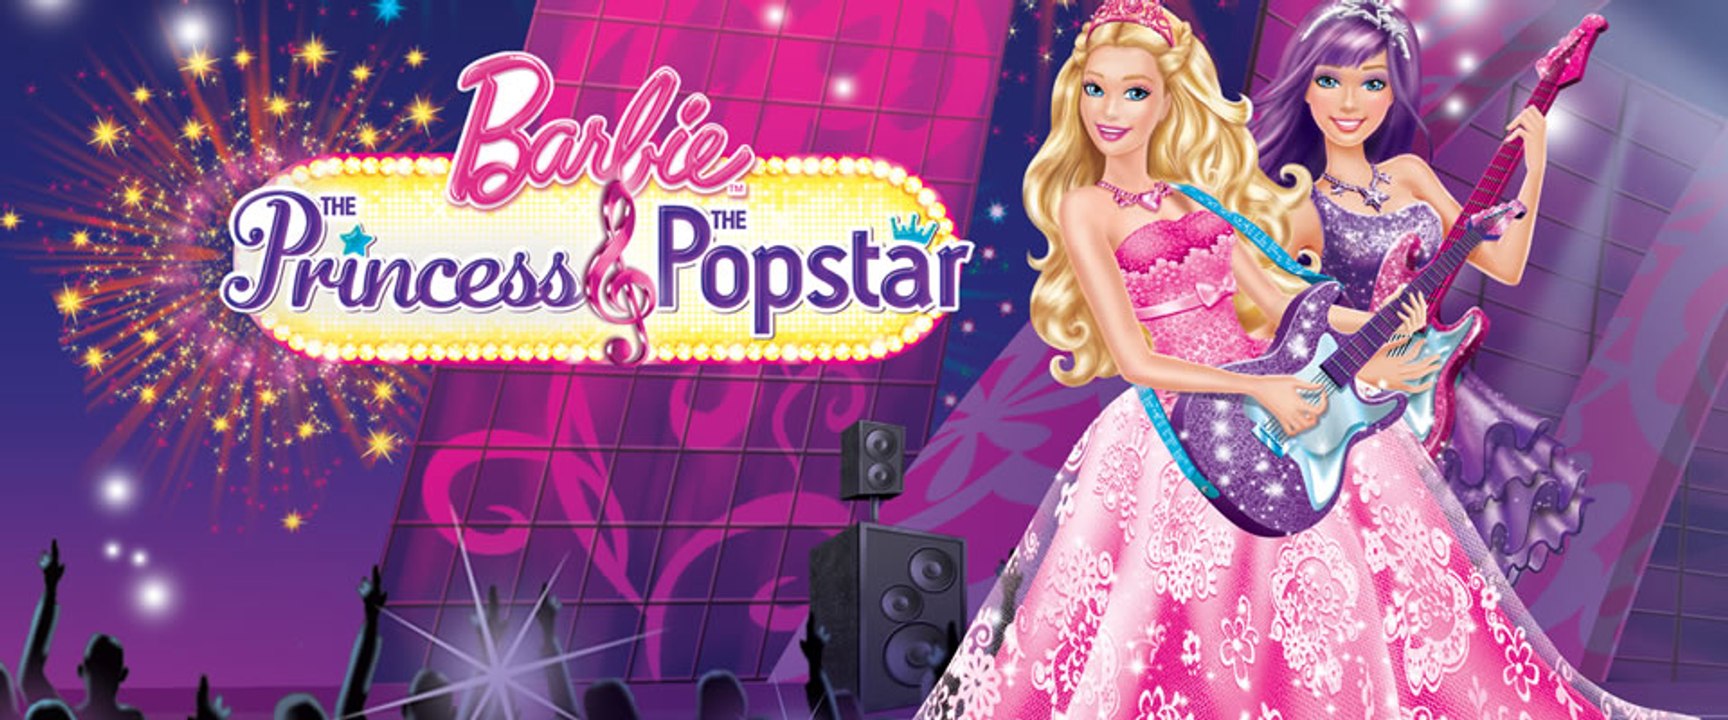 Barbie The Princess & the Popstar Complete Video Part I - video Dailymotion